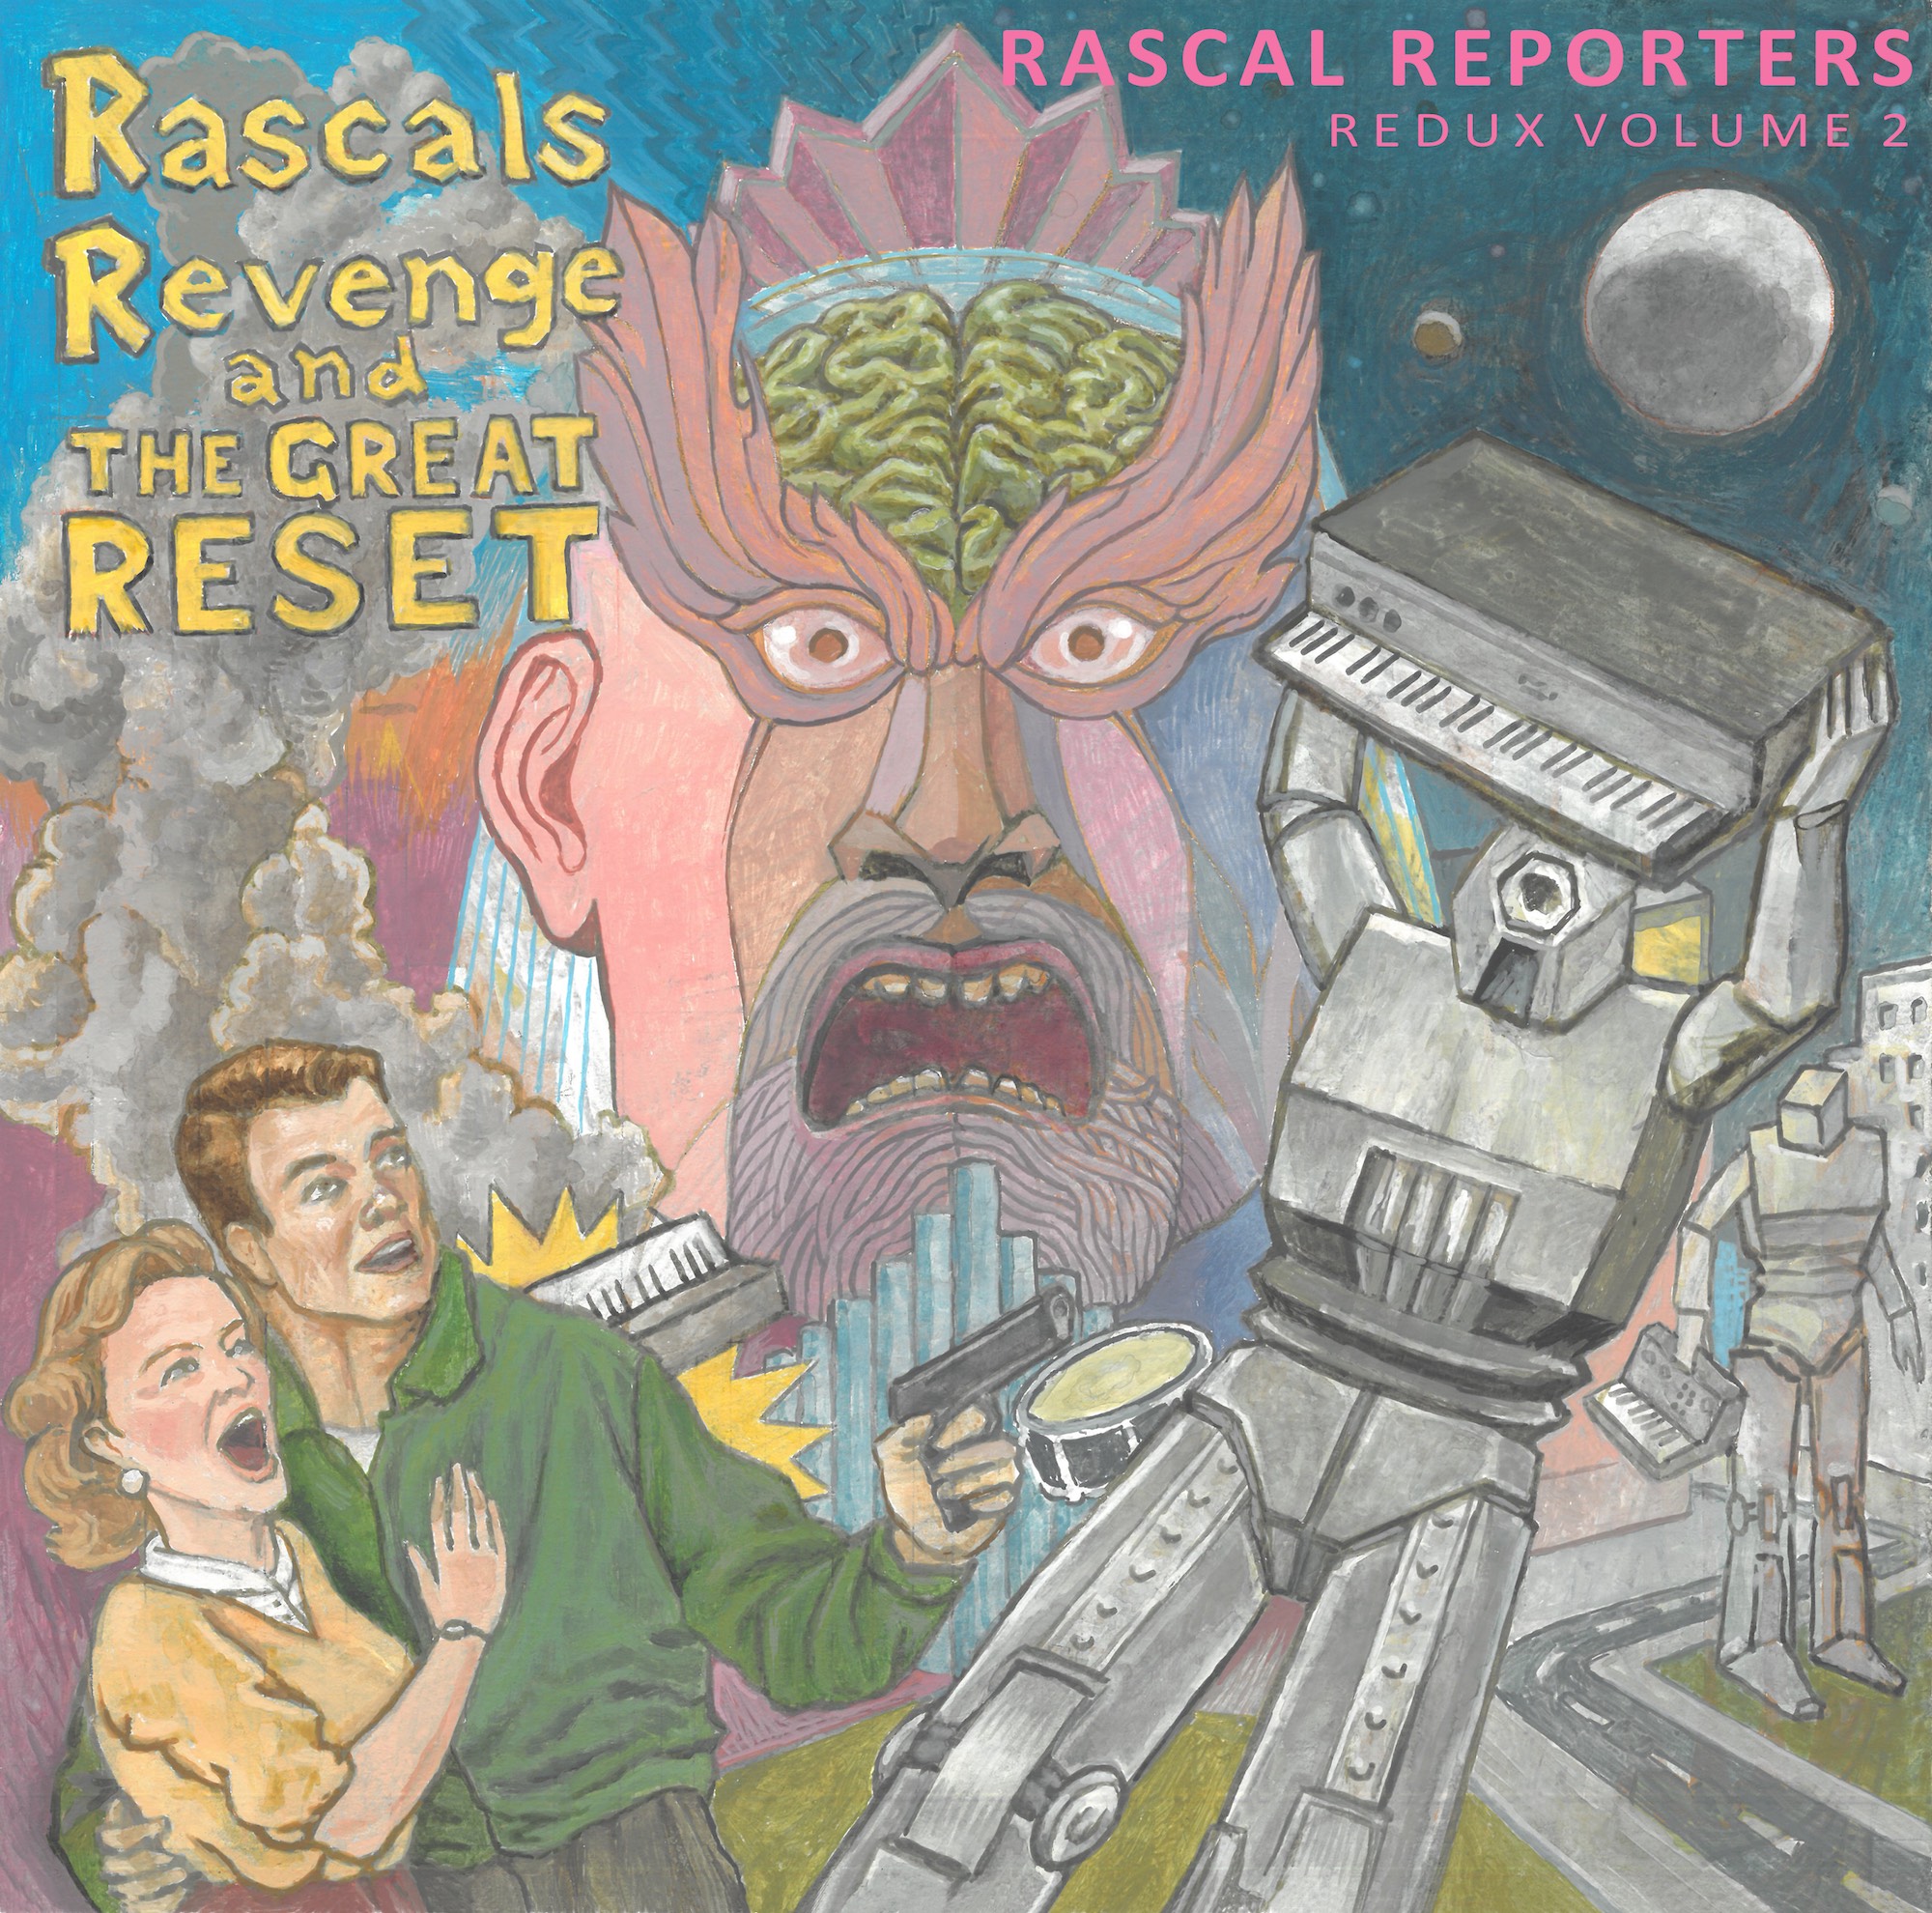 Redux, Vol. 2: Rascals Revenge and the Great Reset